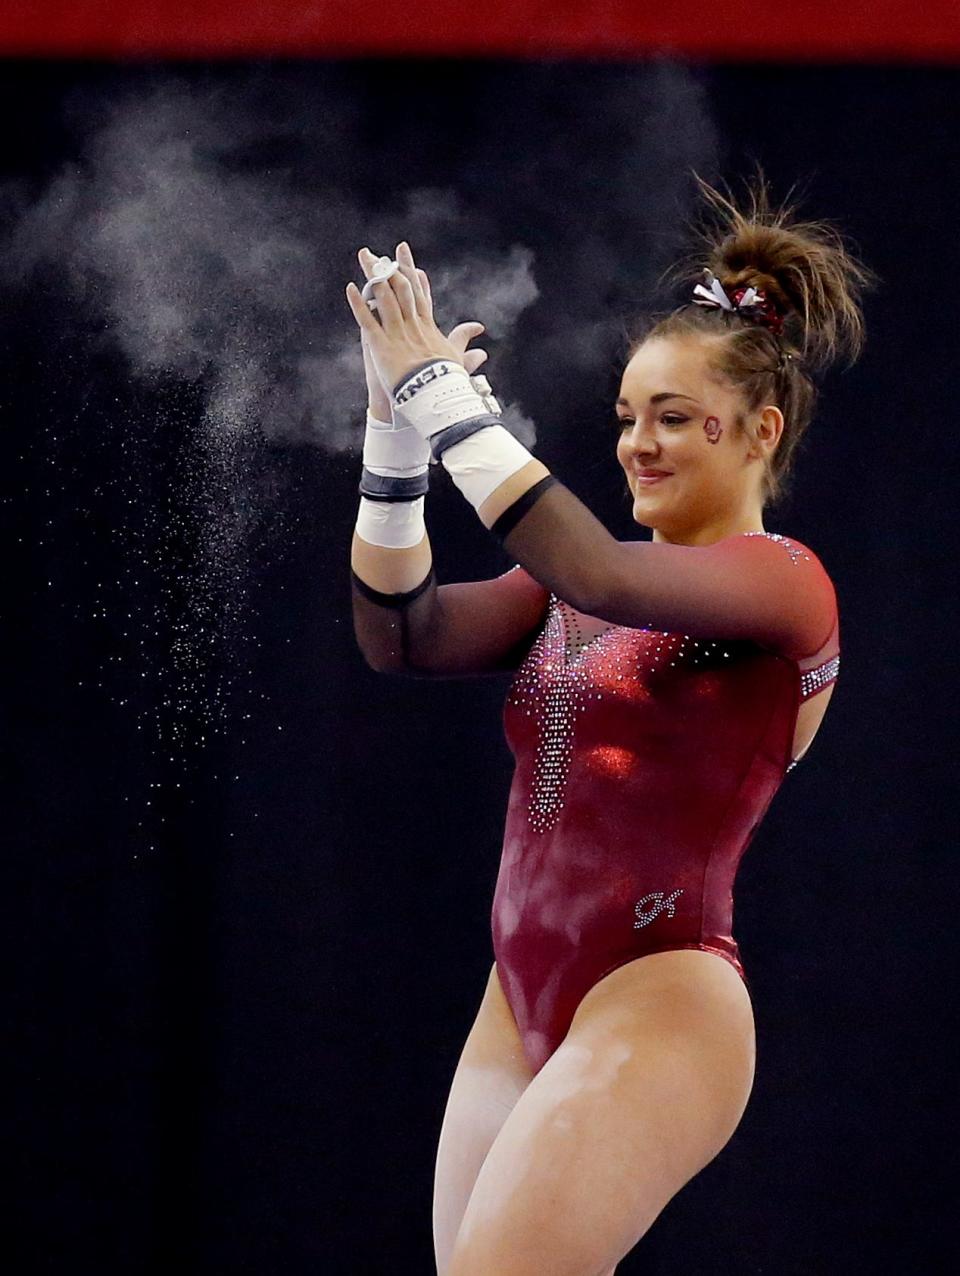 With her memoir, 'Unstoppable,' Maggie Nichols hopes to inspire others through her story of heartache and triumph.